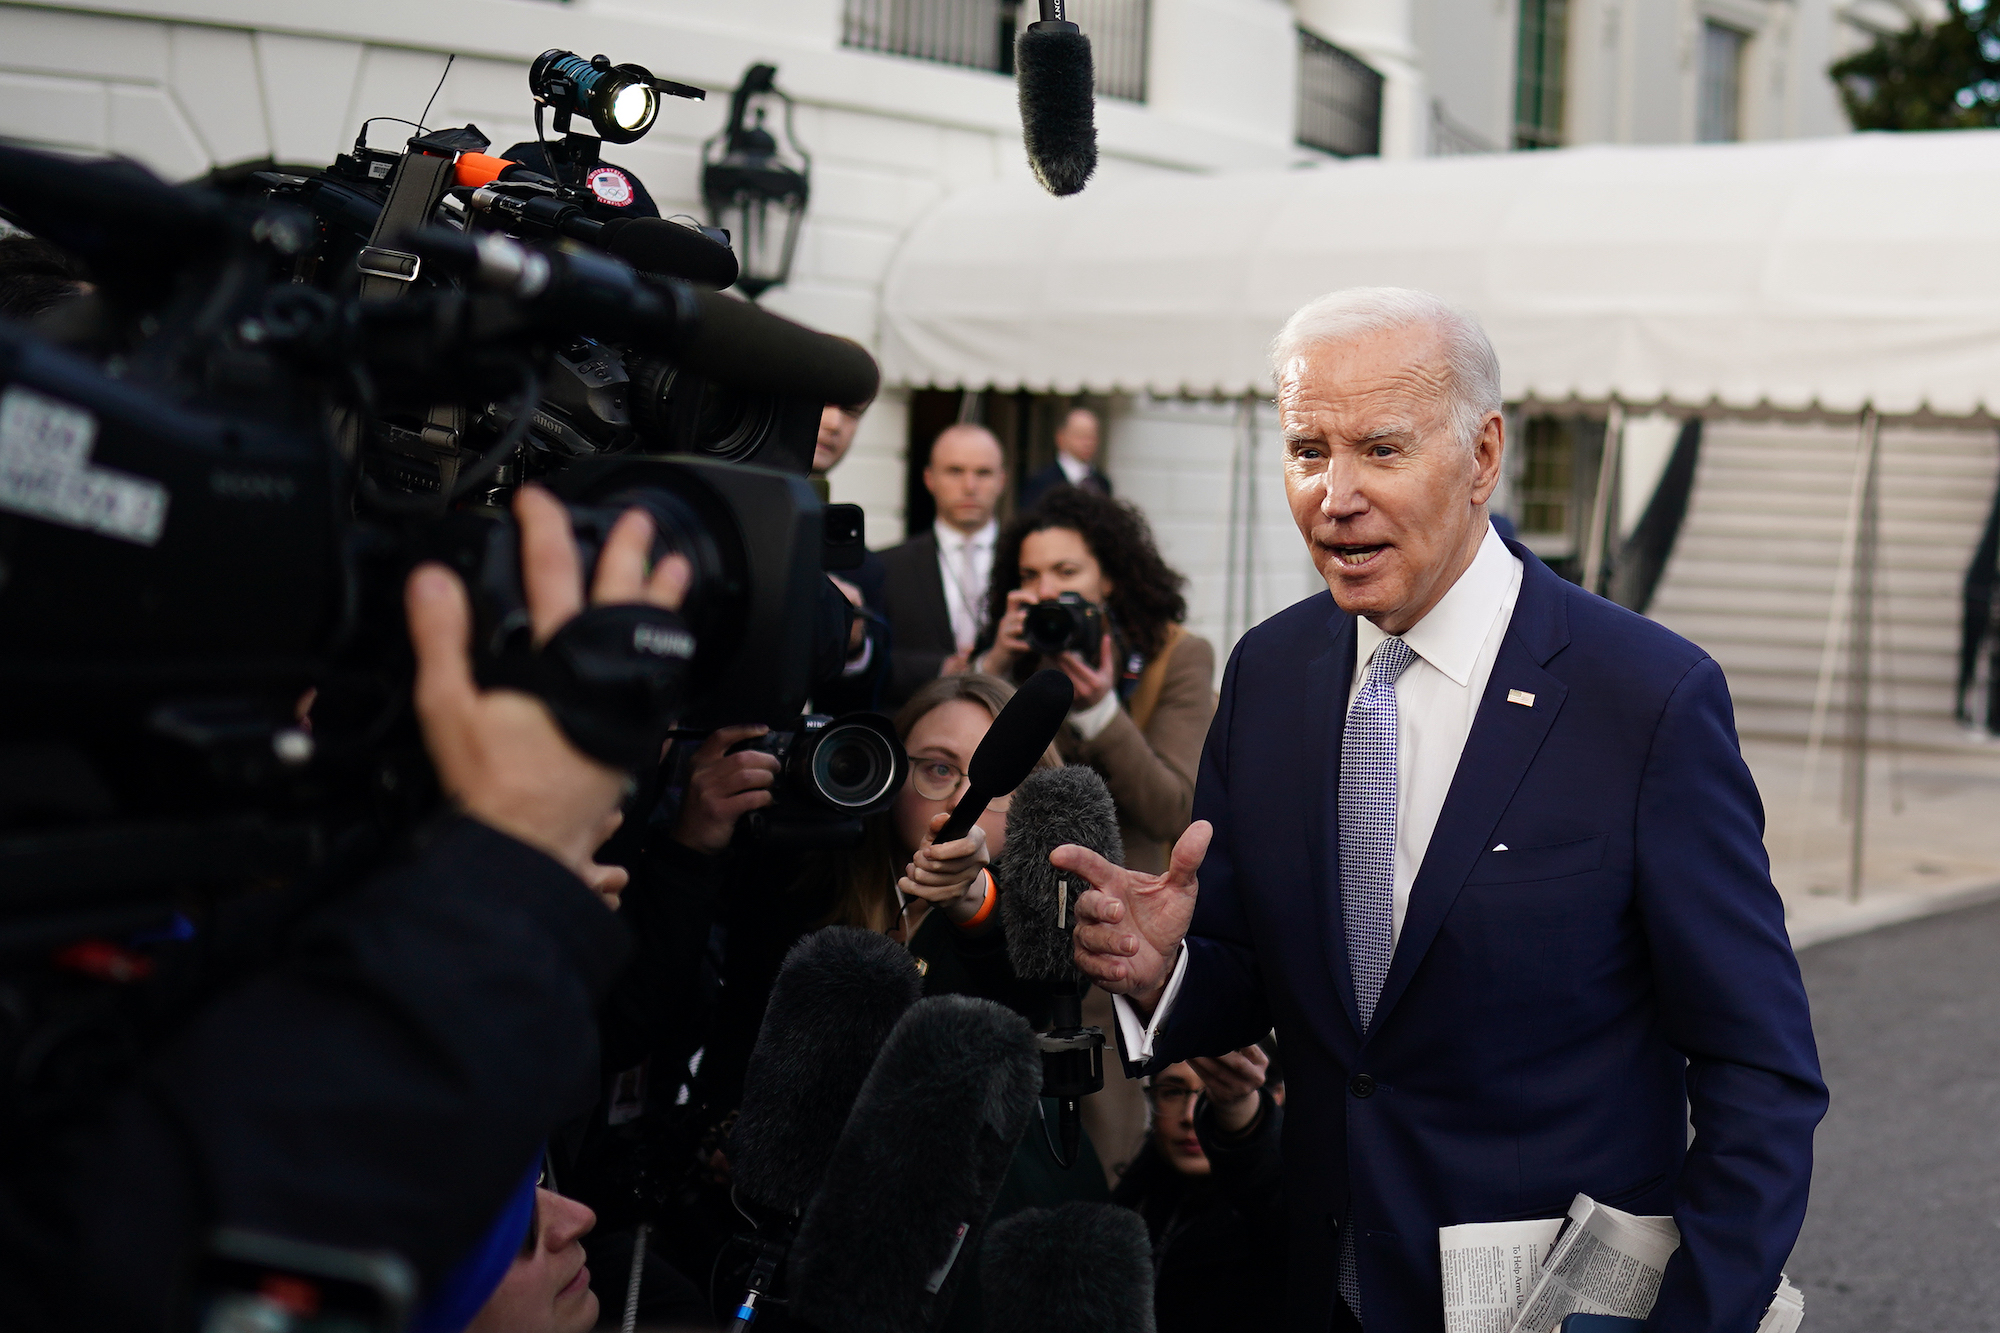 President Biden speaks to members of the media before boarding Marine One on the South Lawn of the White House on Friday.